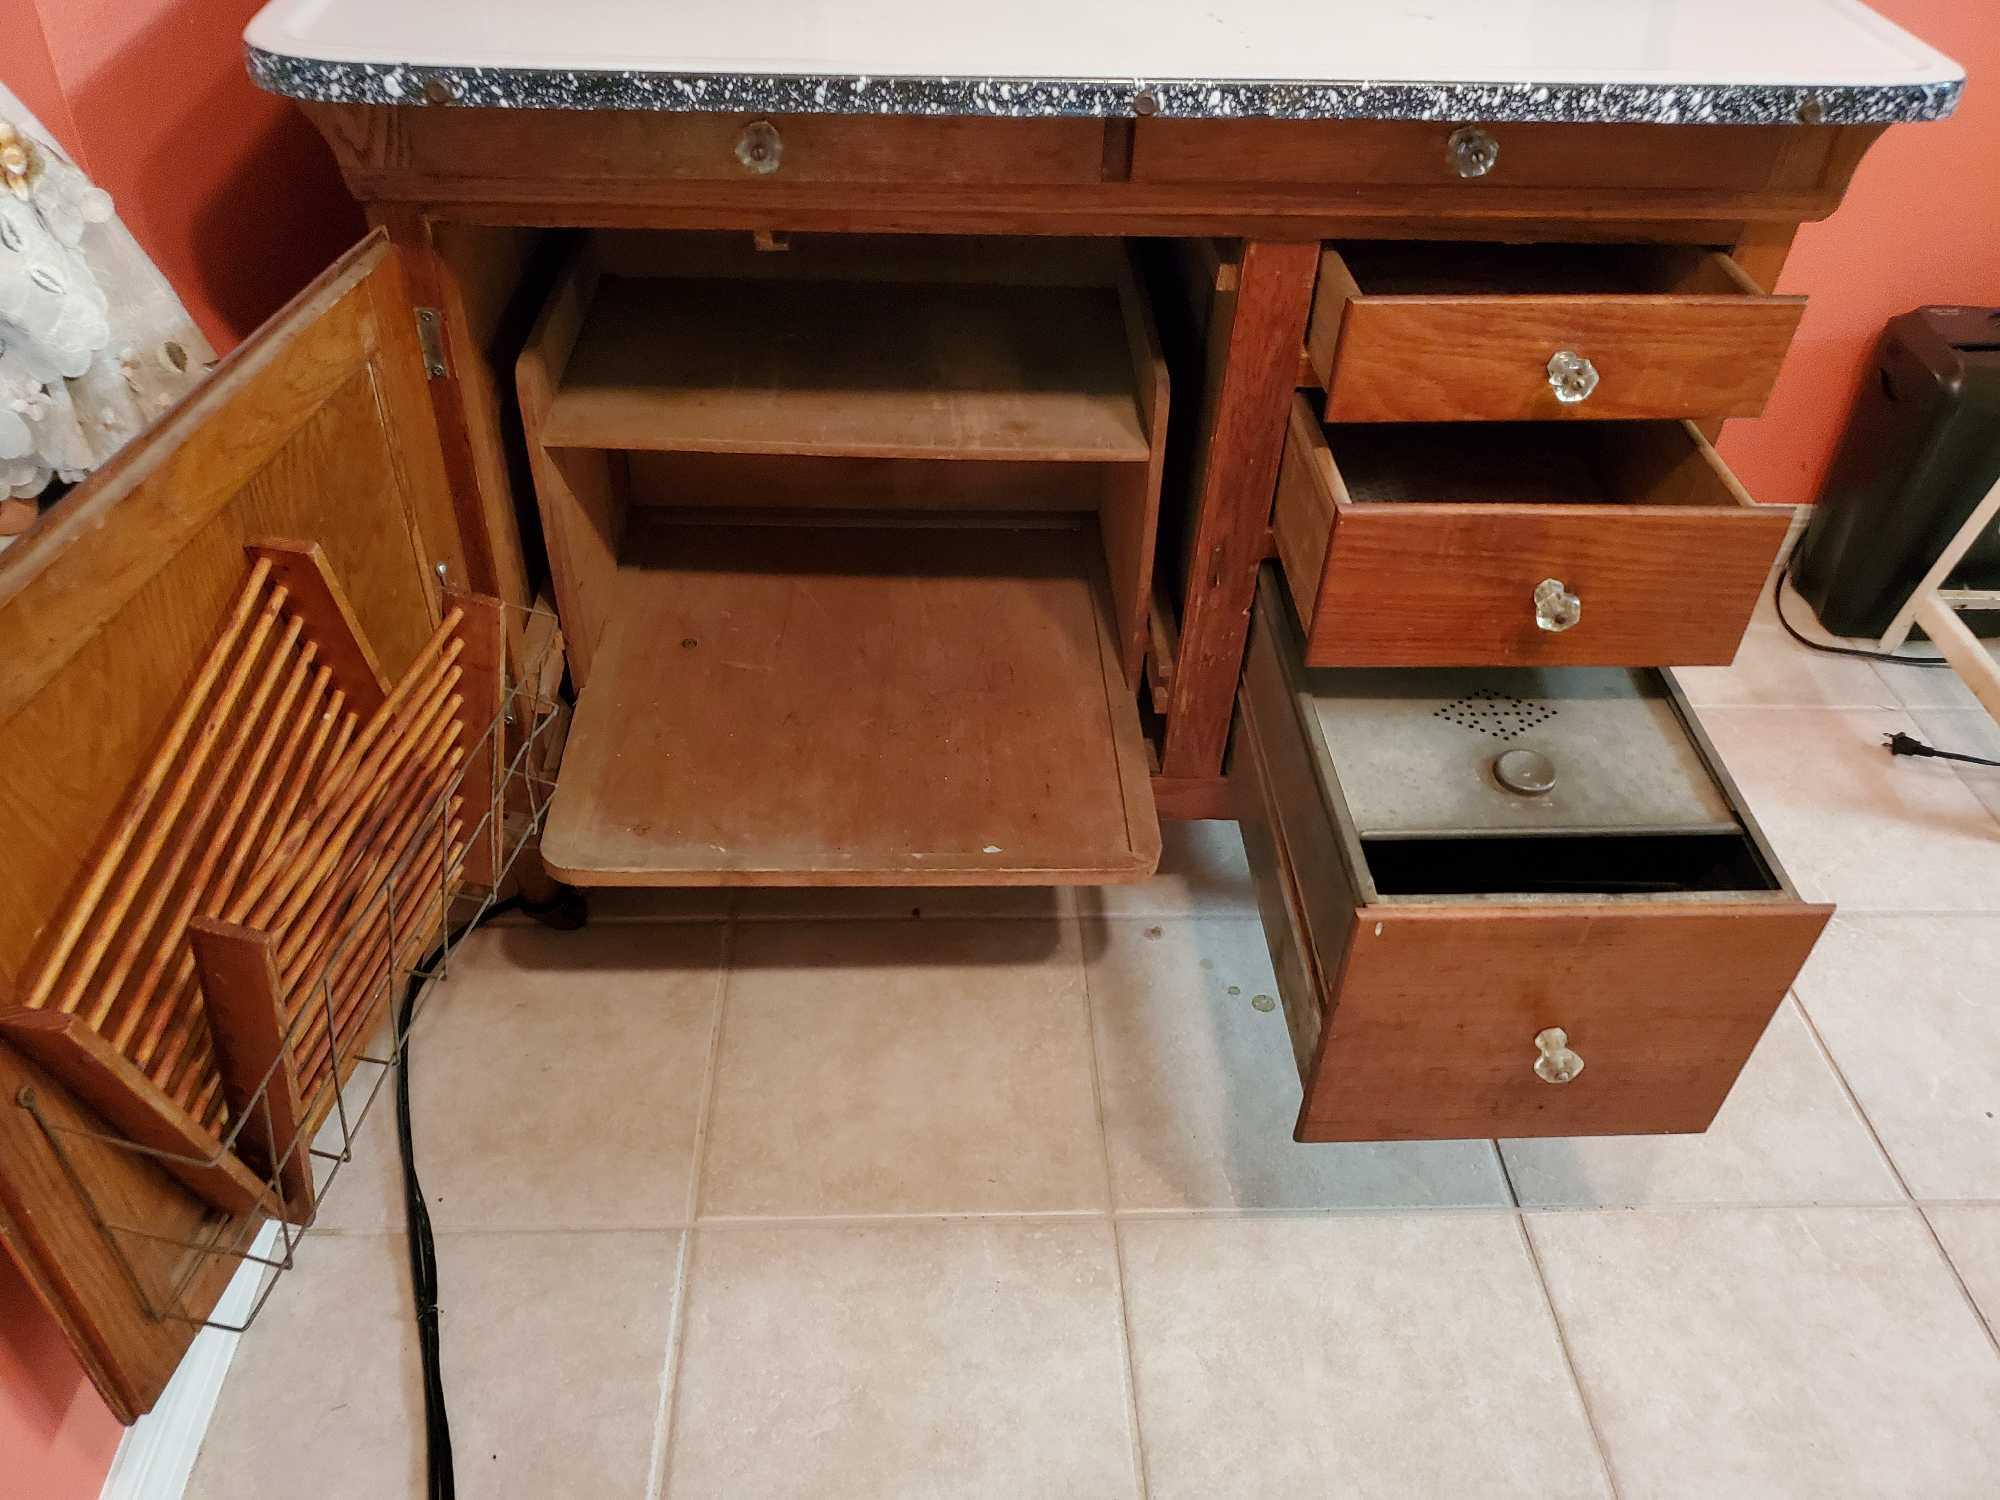 SPECTACULAR Antique SELLERS brand HOOSIER cabinet with attached KAFFEE coffee Grinder